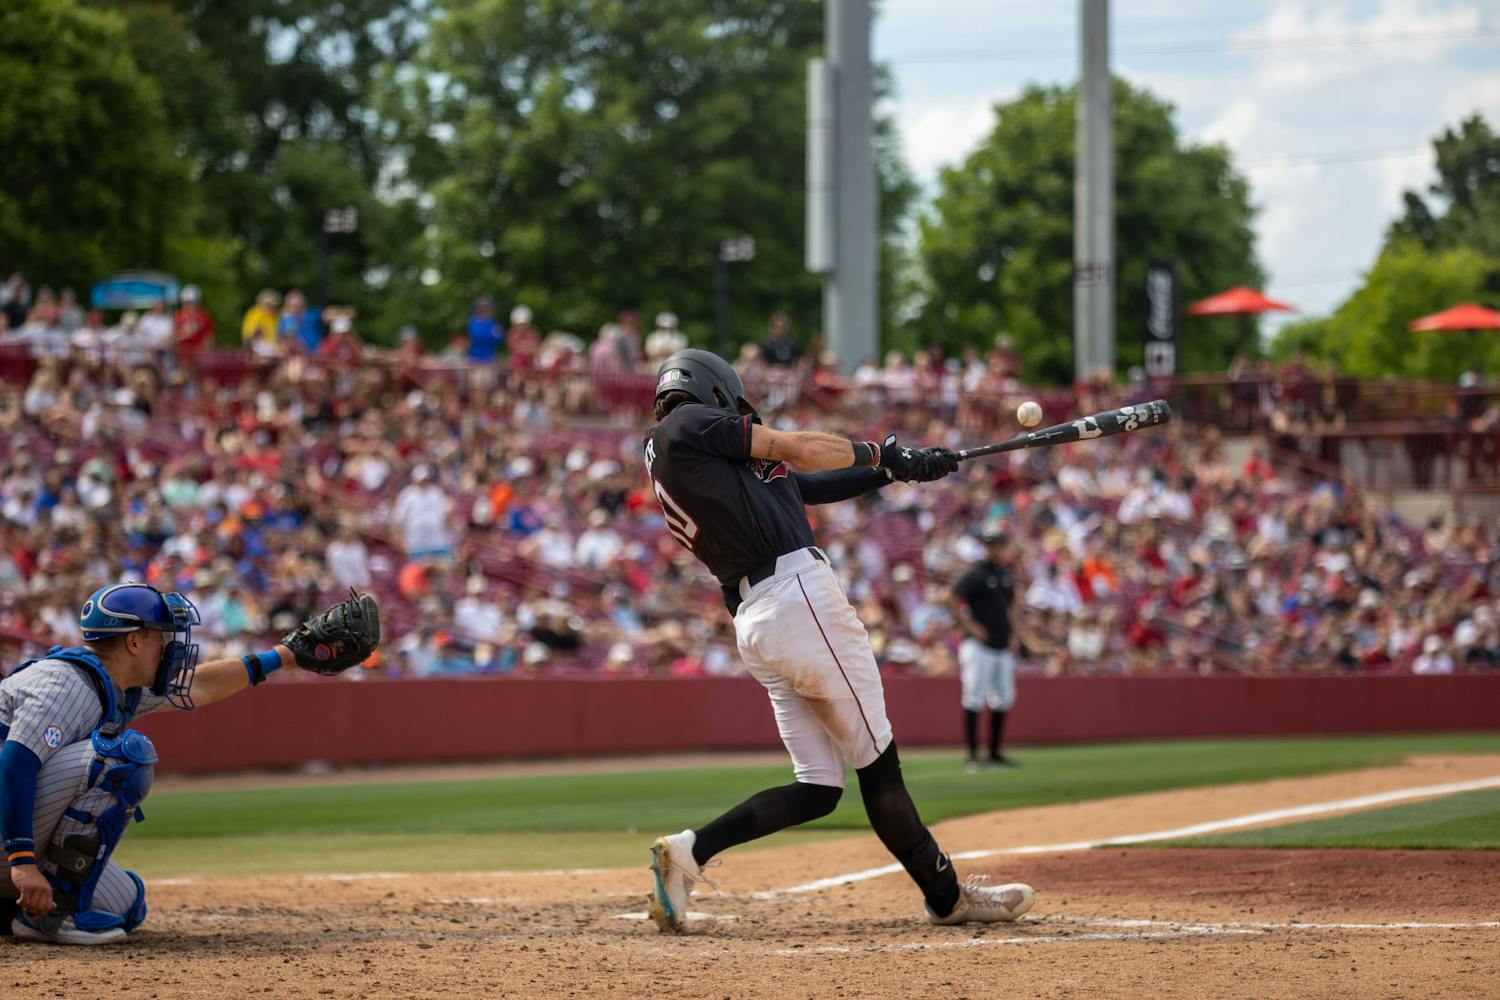 Senior outfielder Dylan Brewer connects with the ball on April 22, 2023, at Founders Park during the third game between South Carolina and Florida. Brewer accounted for three runs and went 4-5 at the plate in the series finale.